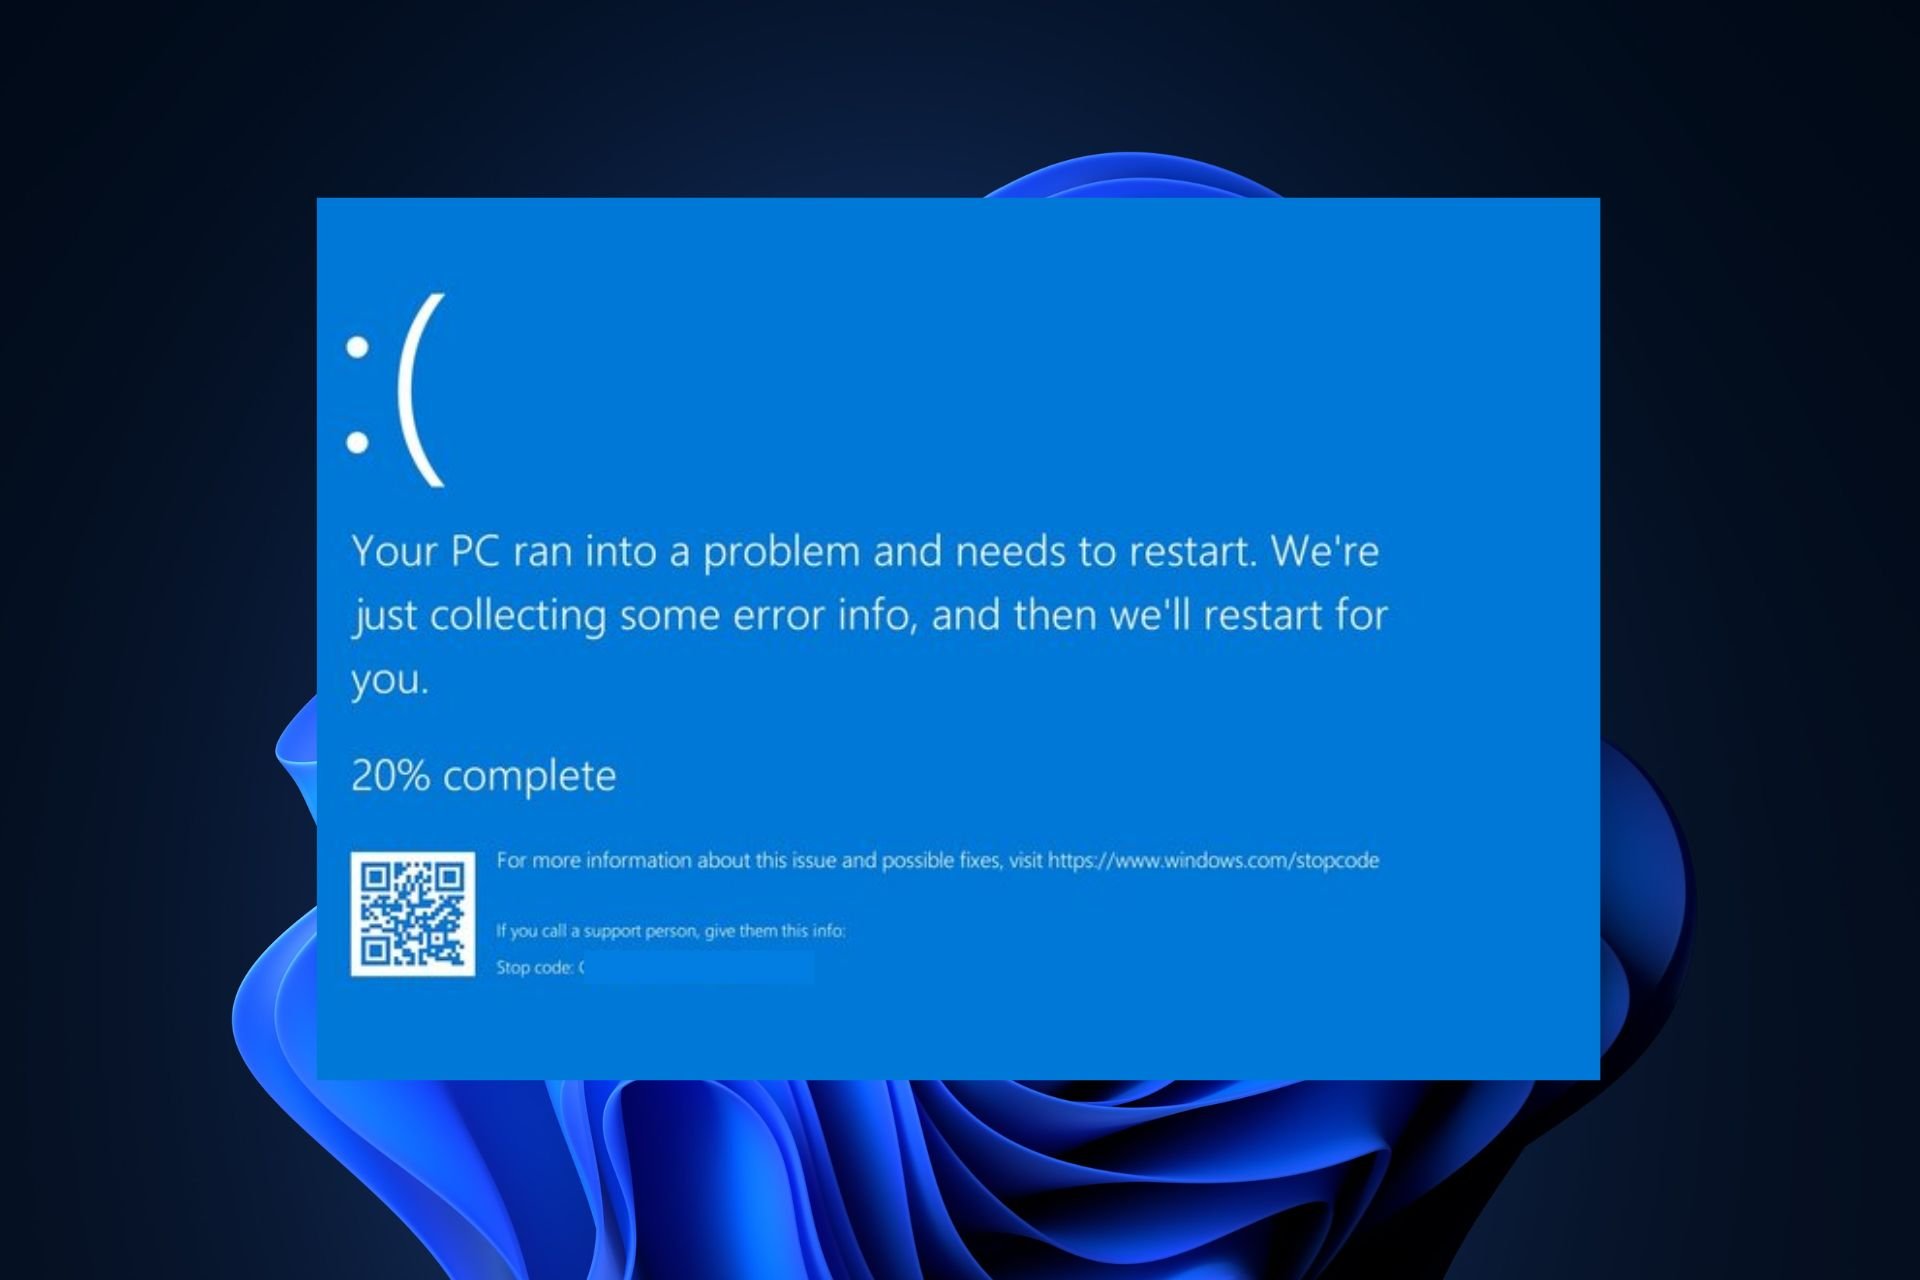 nvpcf.sys BSoD error